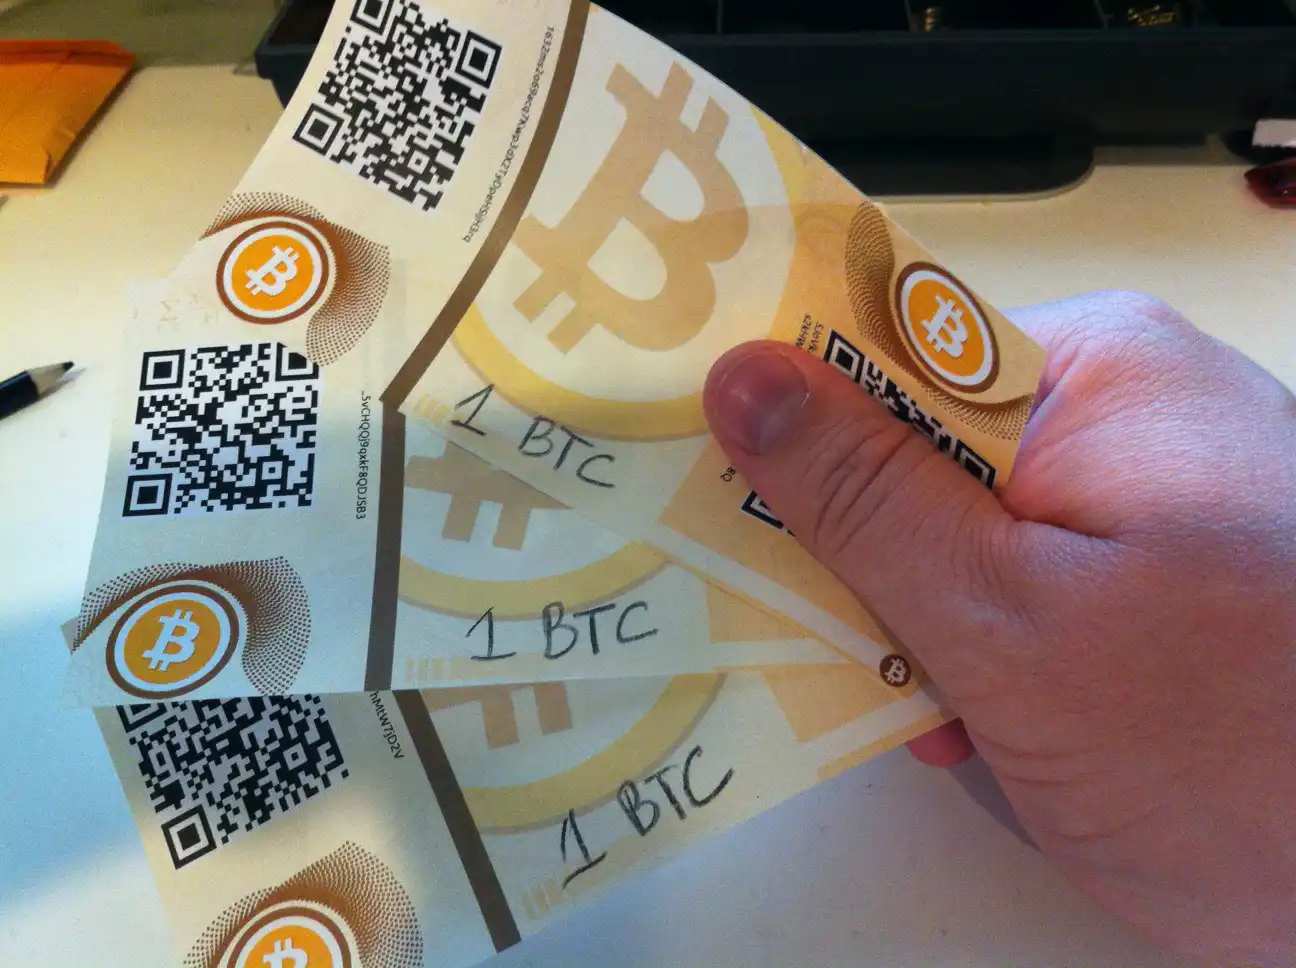 Casascius (an OG bitcoiner) holding 3 early paper wallets of 1 BTC each